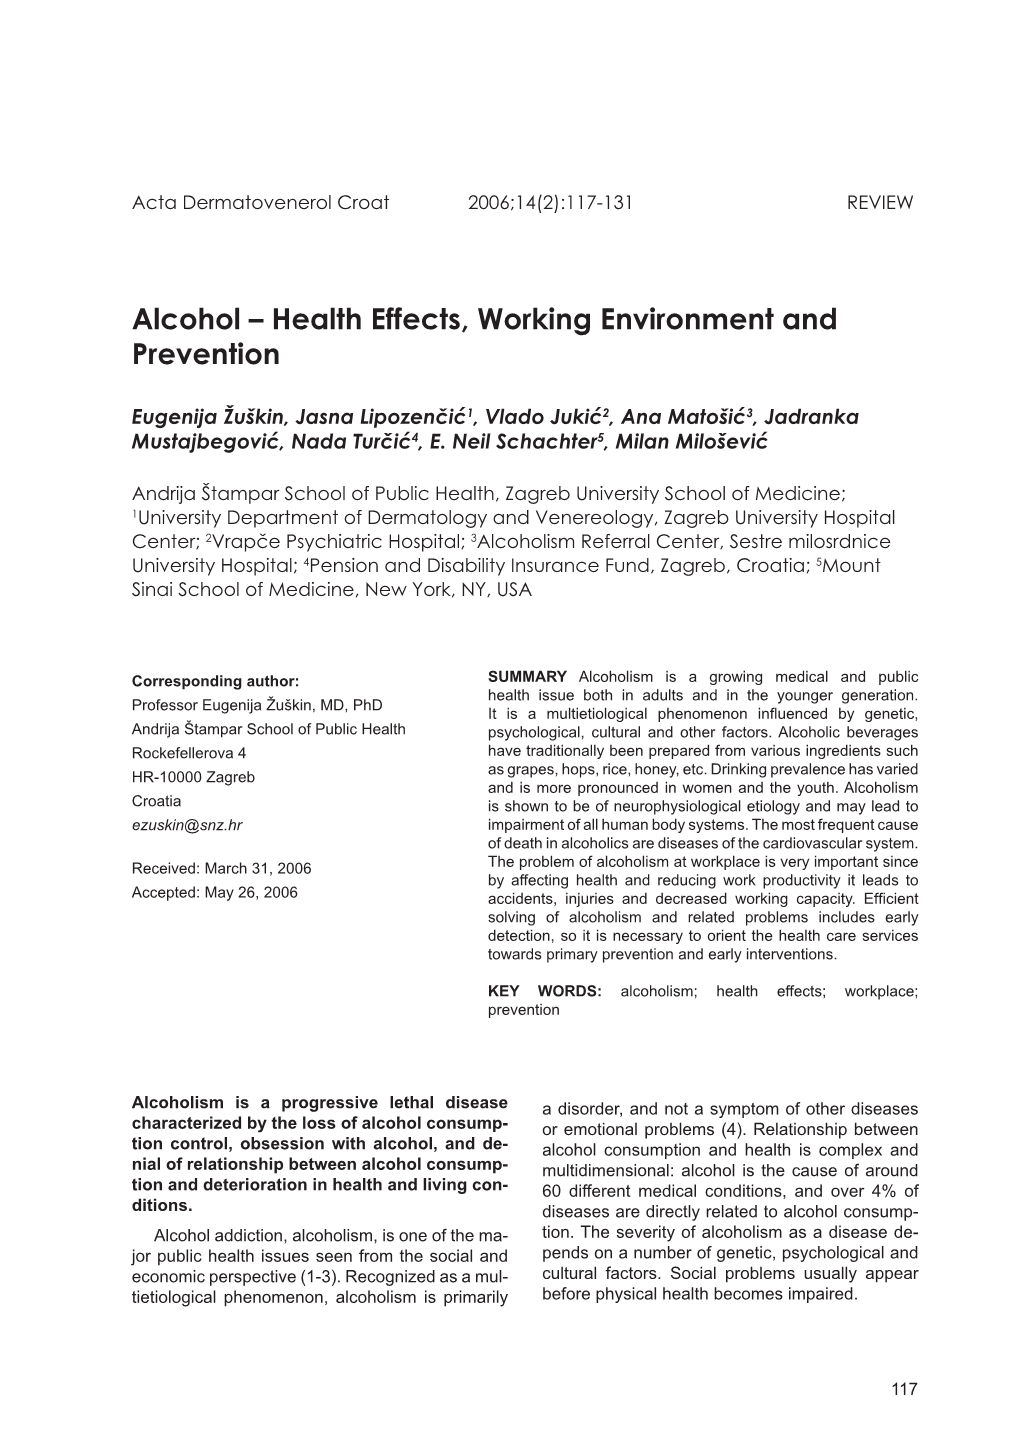 Alcohol – Health Effects, Working Environment and Prevention